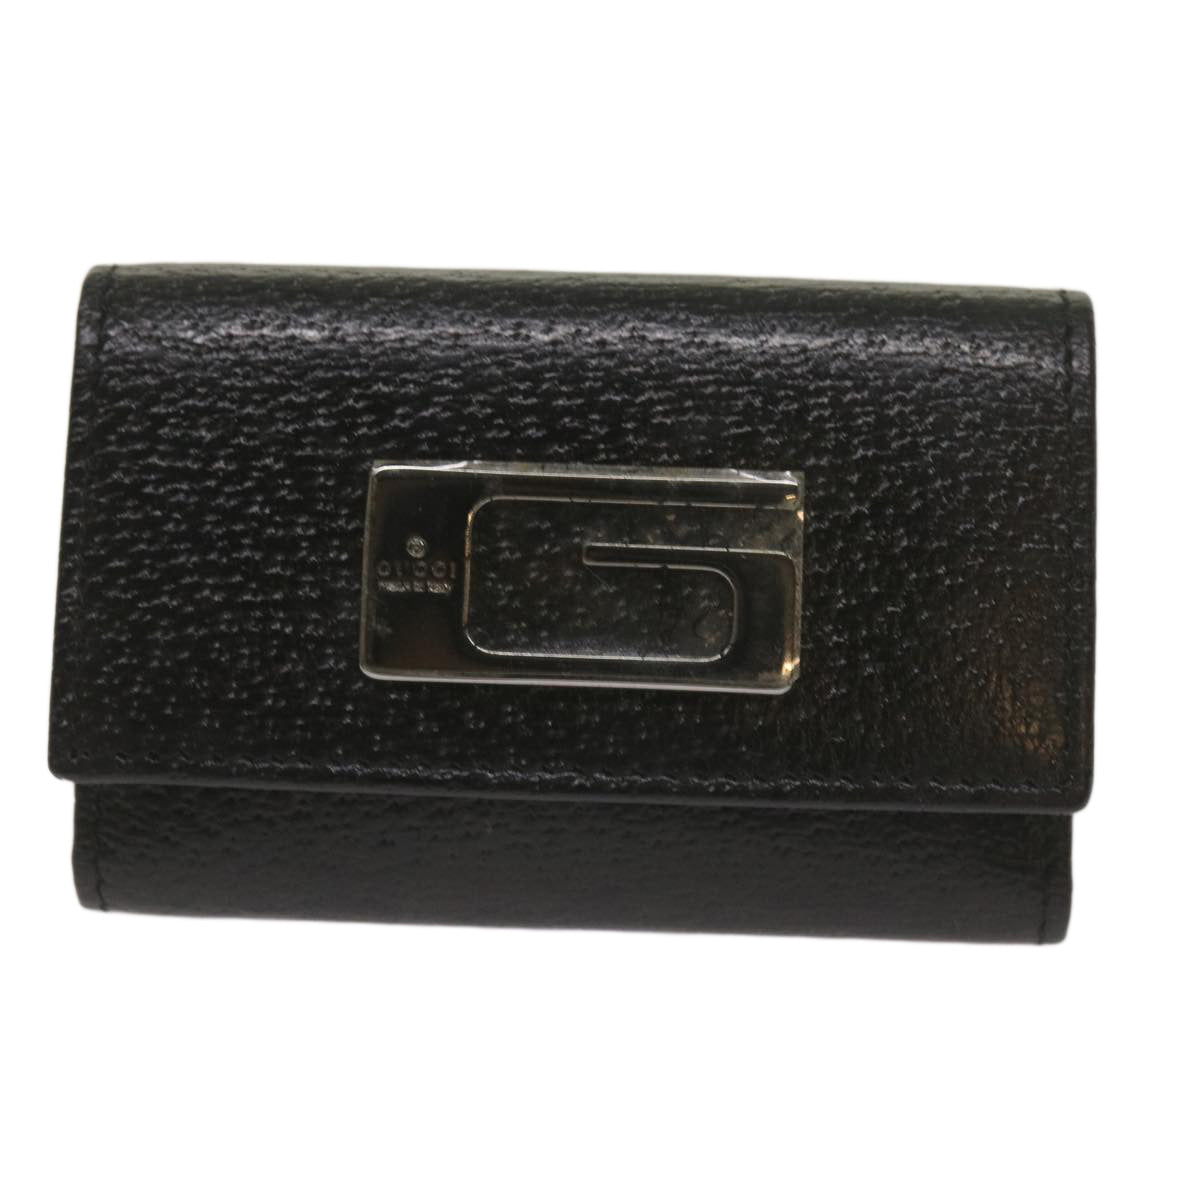 GUCCI Key Case Leather Black Auth bs11936 - 0